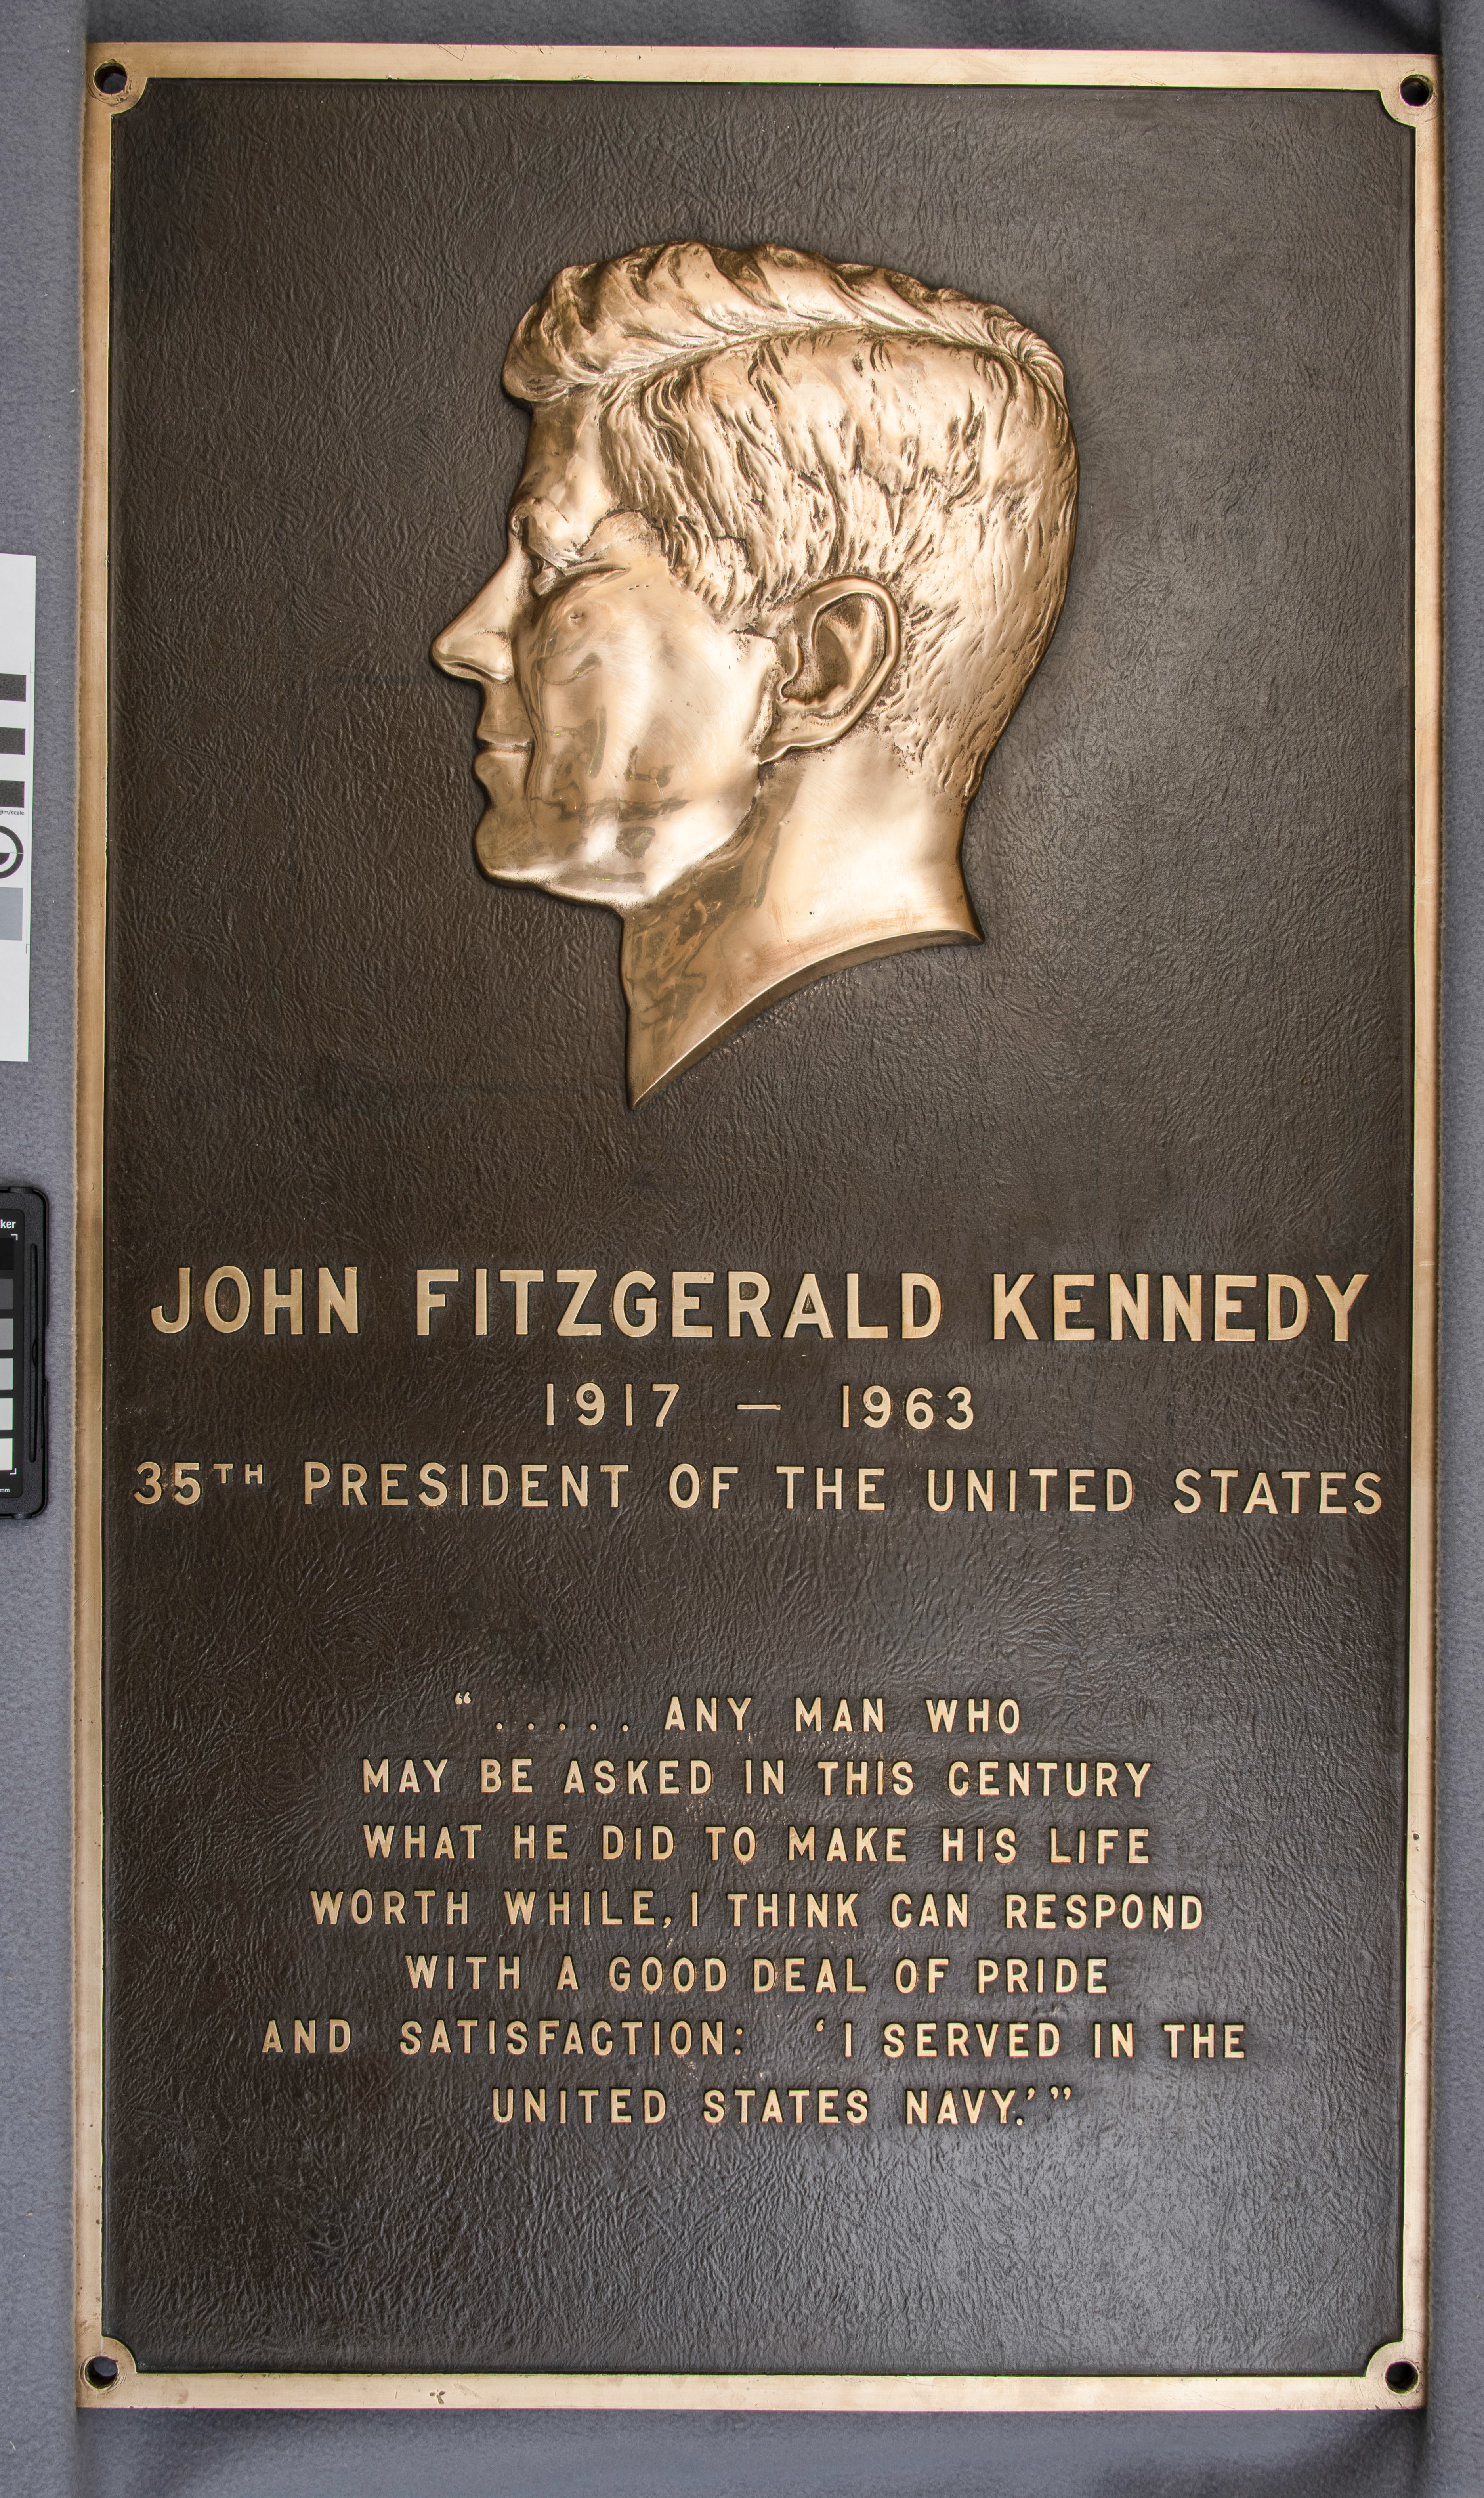 https://www.history.navy.mil/content/dam/nhhc/our-collections/artifacts/ship-and-shore/builders-memorial-and-historical-data-plaques/Commemorative%20Plaques/2007-60-3_USS_JFK_plaque/20191202_0027cc.cc_1.jpg